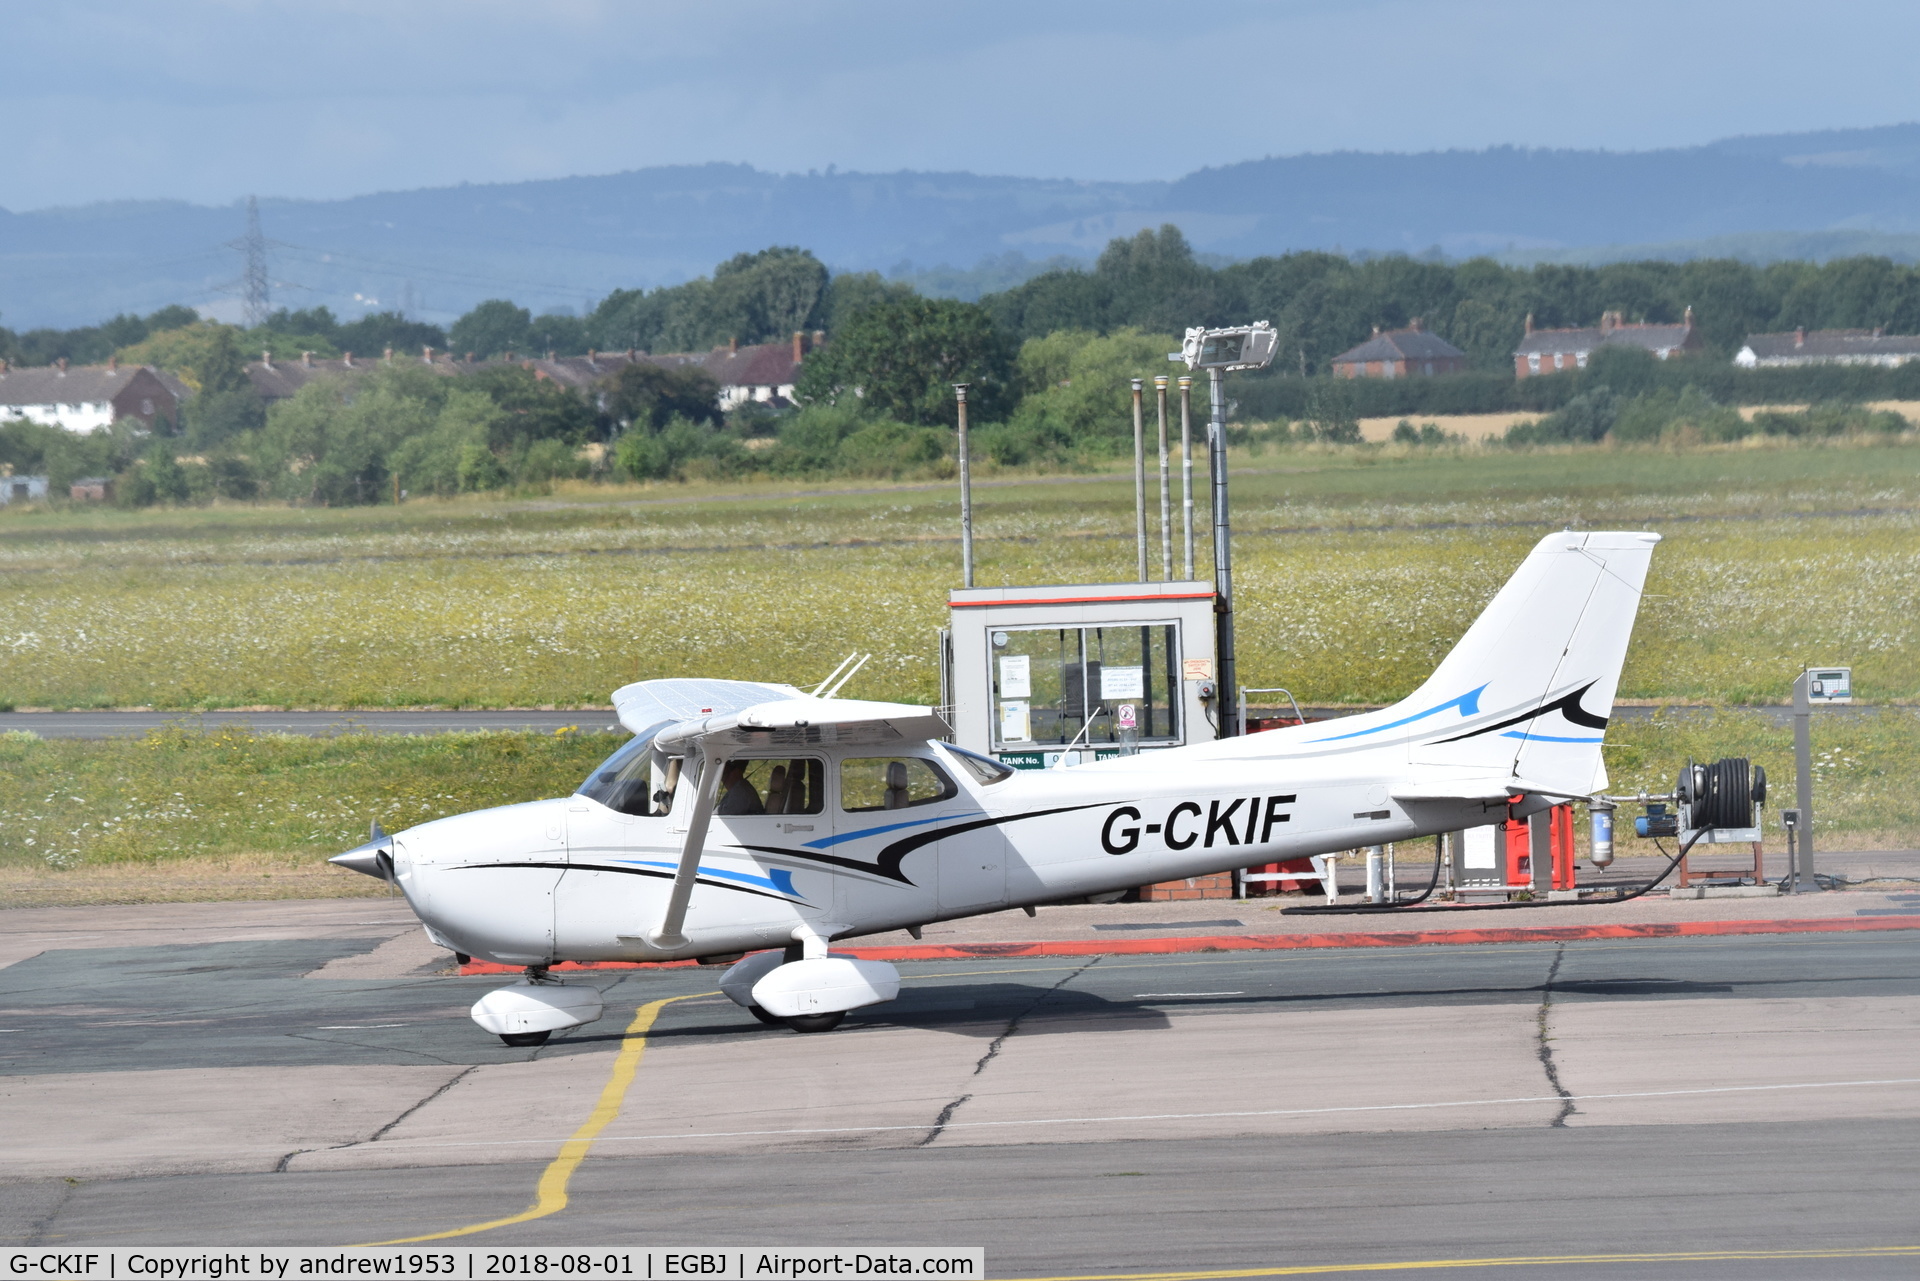 G-CKIF, 2013 Cessna 172S C/N 172S11291, G-CKIF at Gloucestershire Airport.